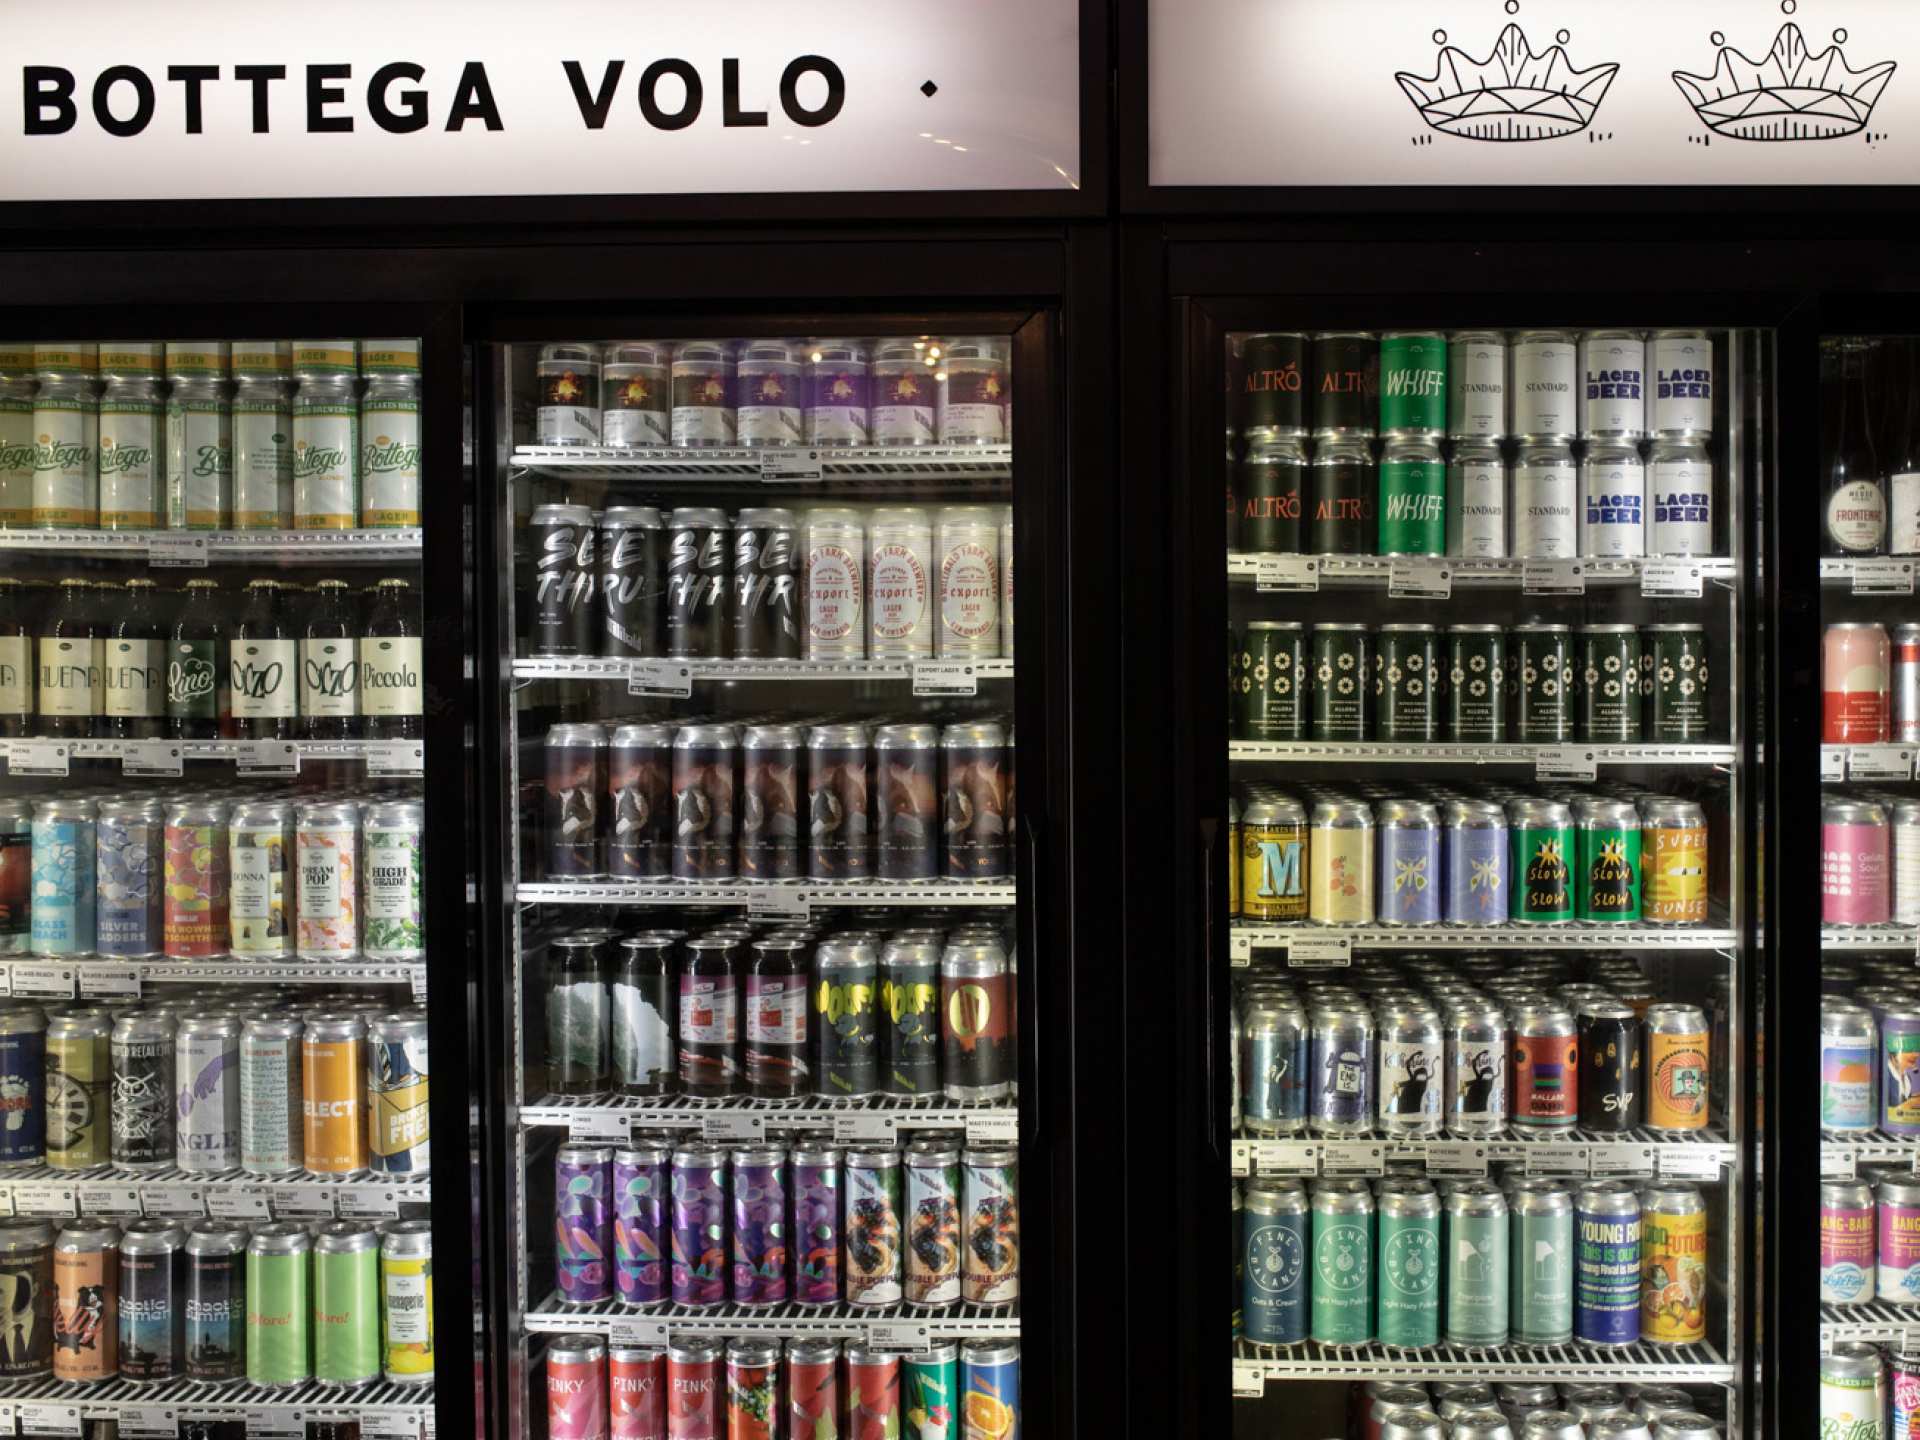 Toronto bottle shops and alcohol stores | Beer fridges at Bottega Volo in Littly Italy, Toronto